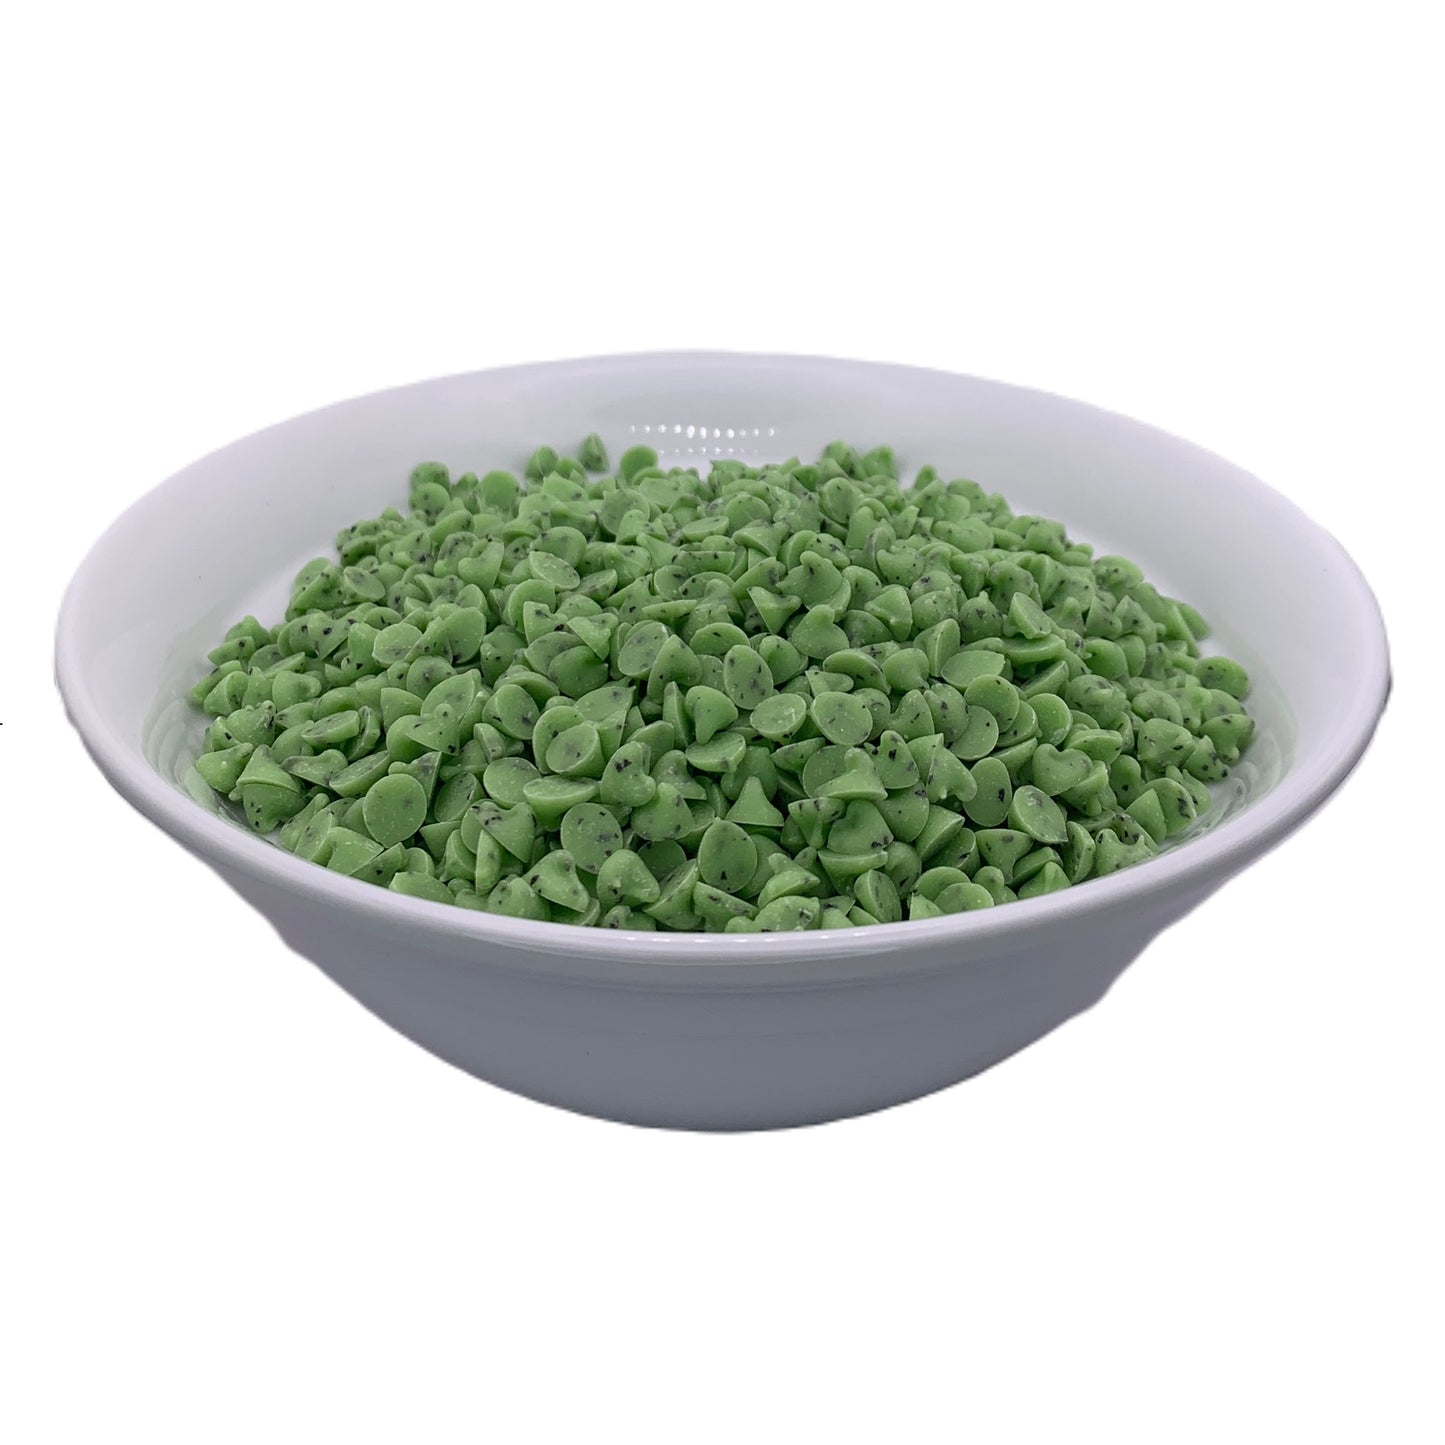 Clasen Green Mint Flavored Chocolate Drops - 1 lb